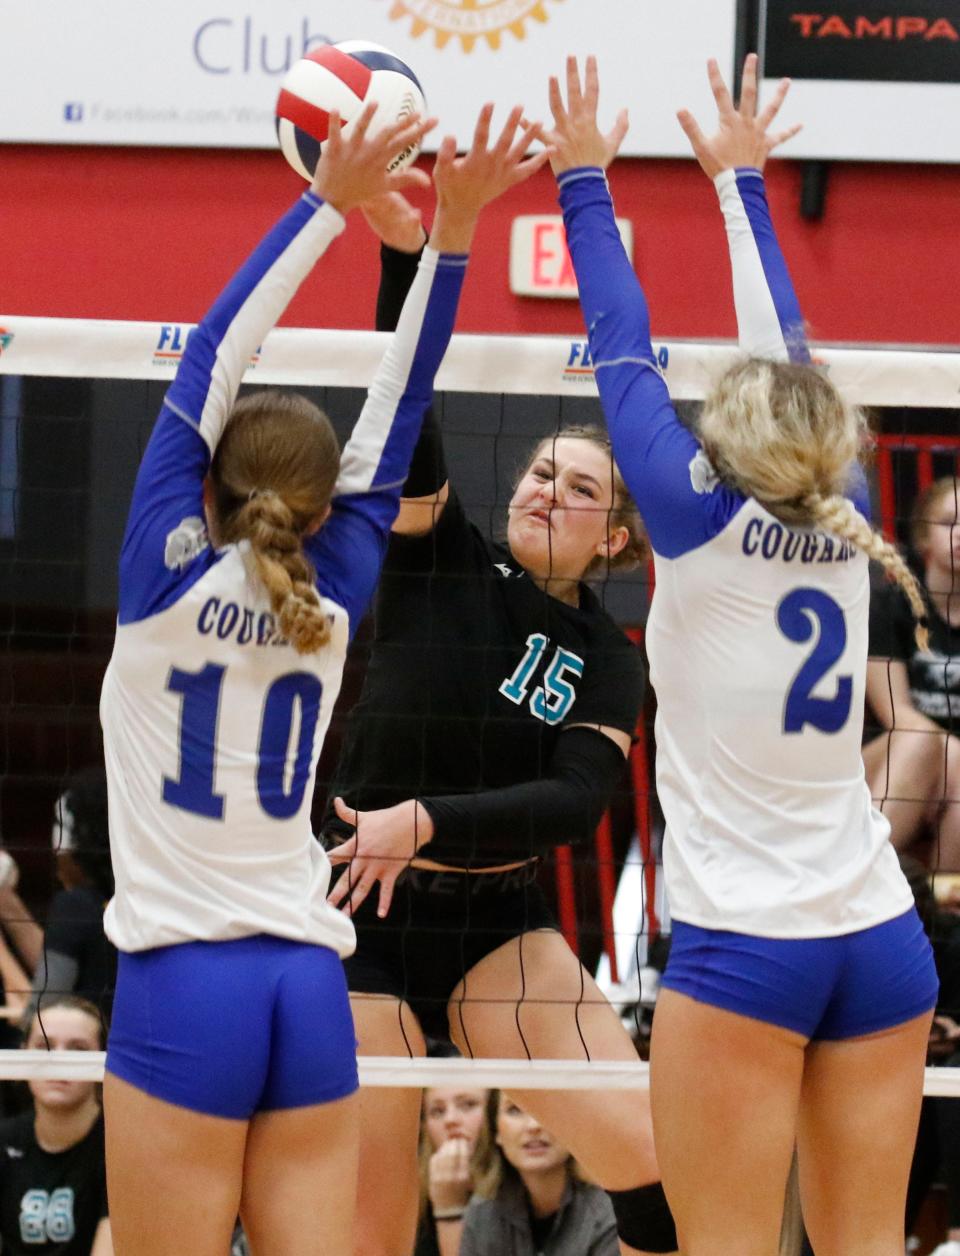 Jensen Beach ’s Jenna Simmons blast spike of outstretched arms of Falcons #10 Miriam Weintraub and #2 Ava Zehnder. Barron Collier vs Jensen Beach HS (Miami). FHSAA Volleyball Semi Finals at Polk State College in Winter Haven Fl. November 8th 2023 Photo by Calvin Knight